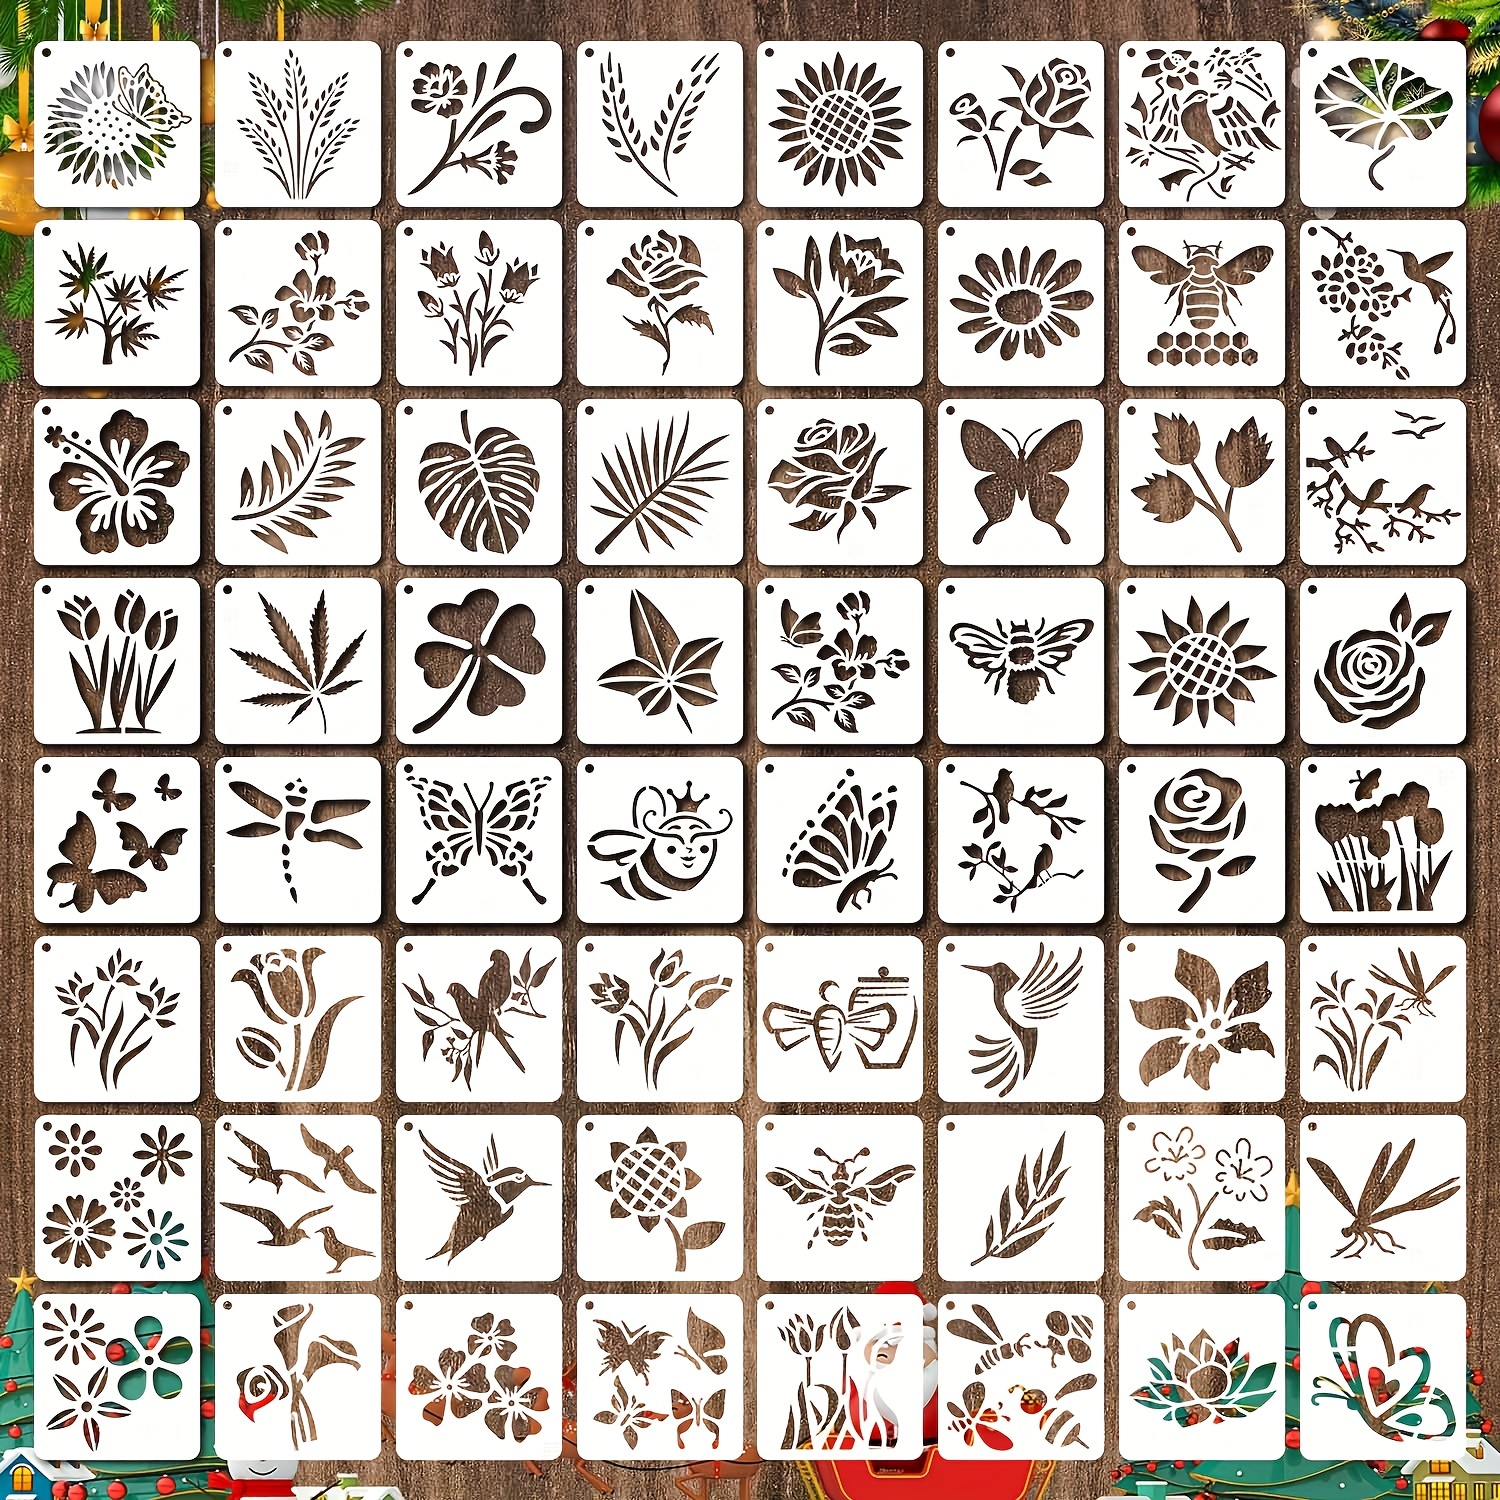  Animal Stencils for Painting, 64pcs 3 Unch Reusable Stencils  for Crafts on Fabric Canvas Wood Wall Rock and Other Home Decor Small  Stencils DIY Craft Template(Animal) : Arts, Crafts 